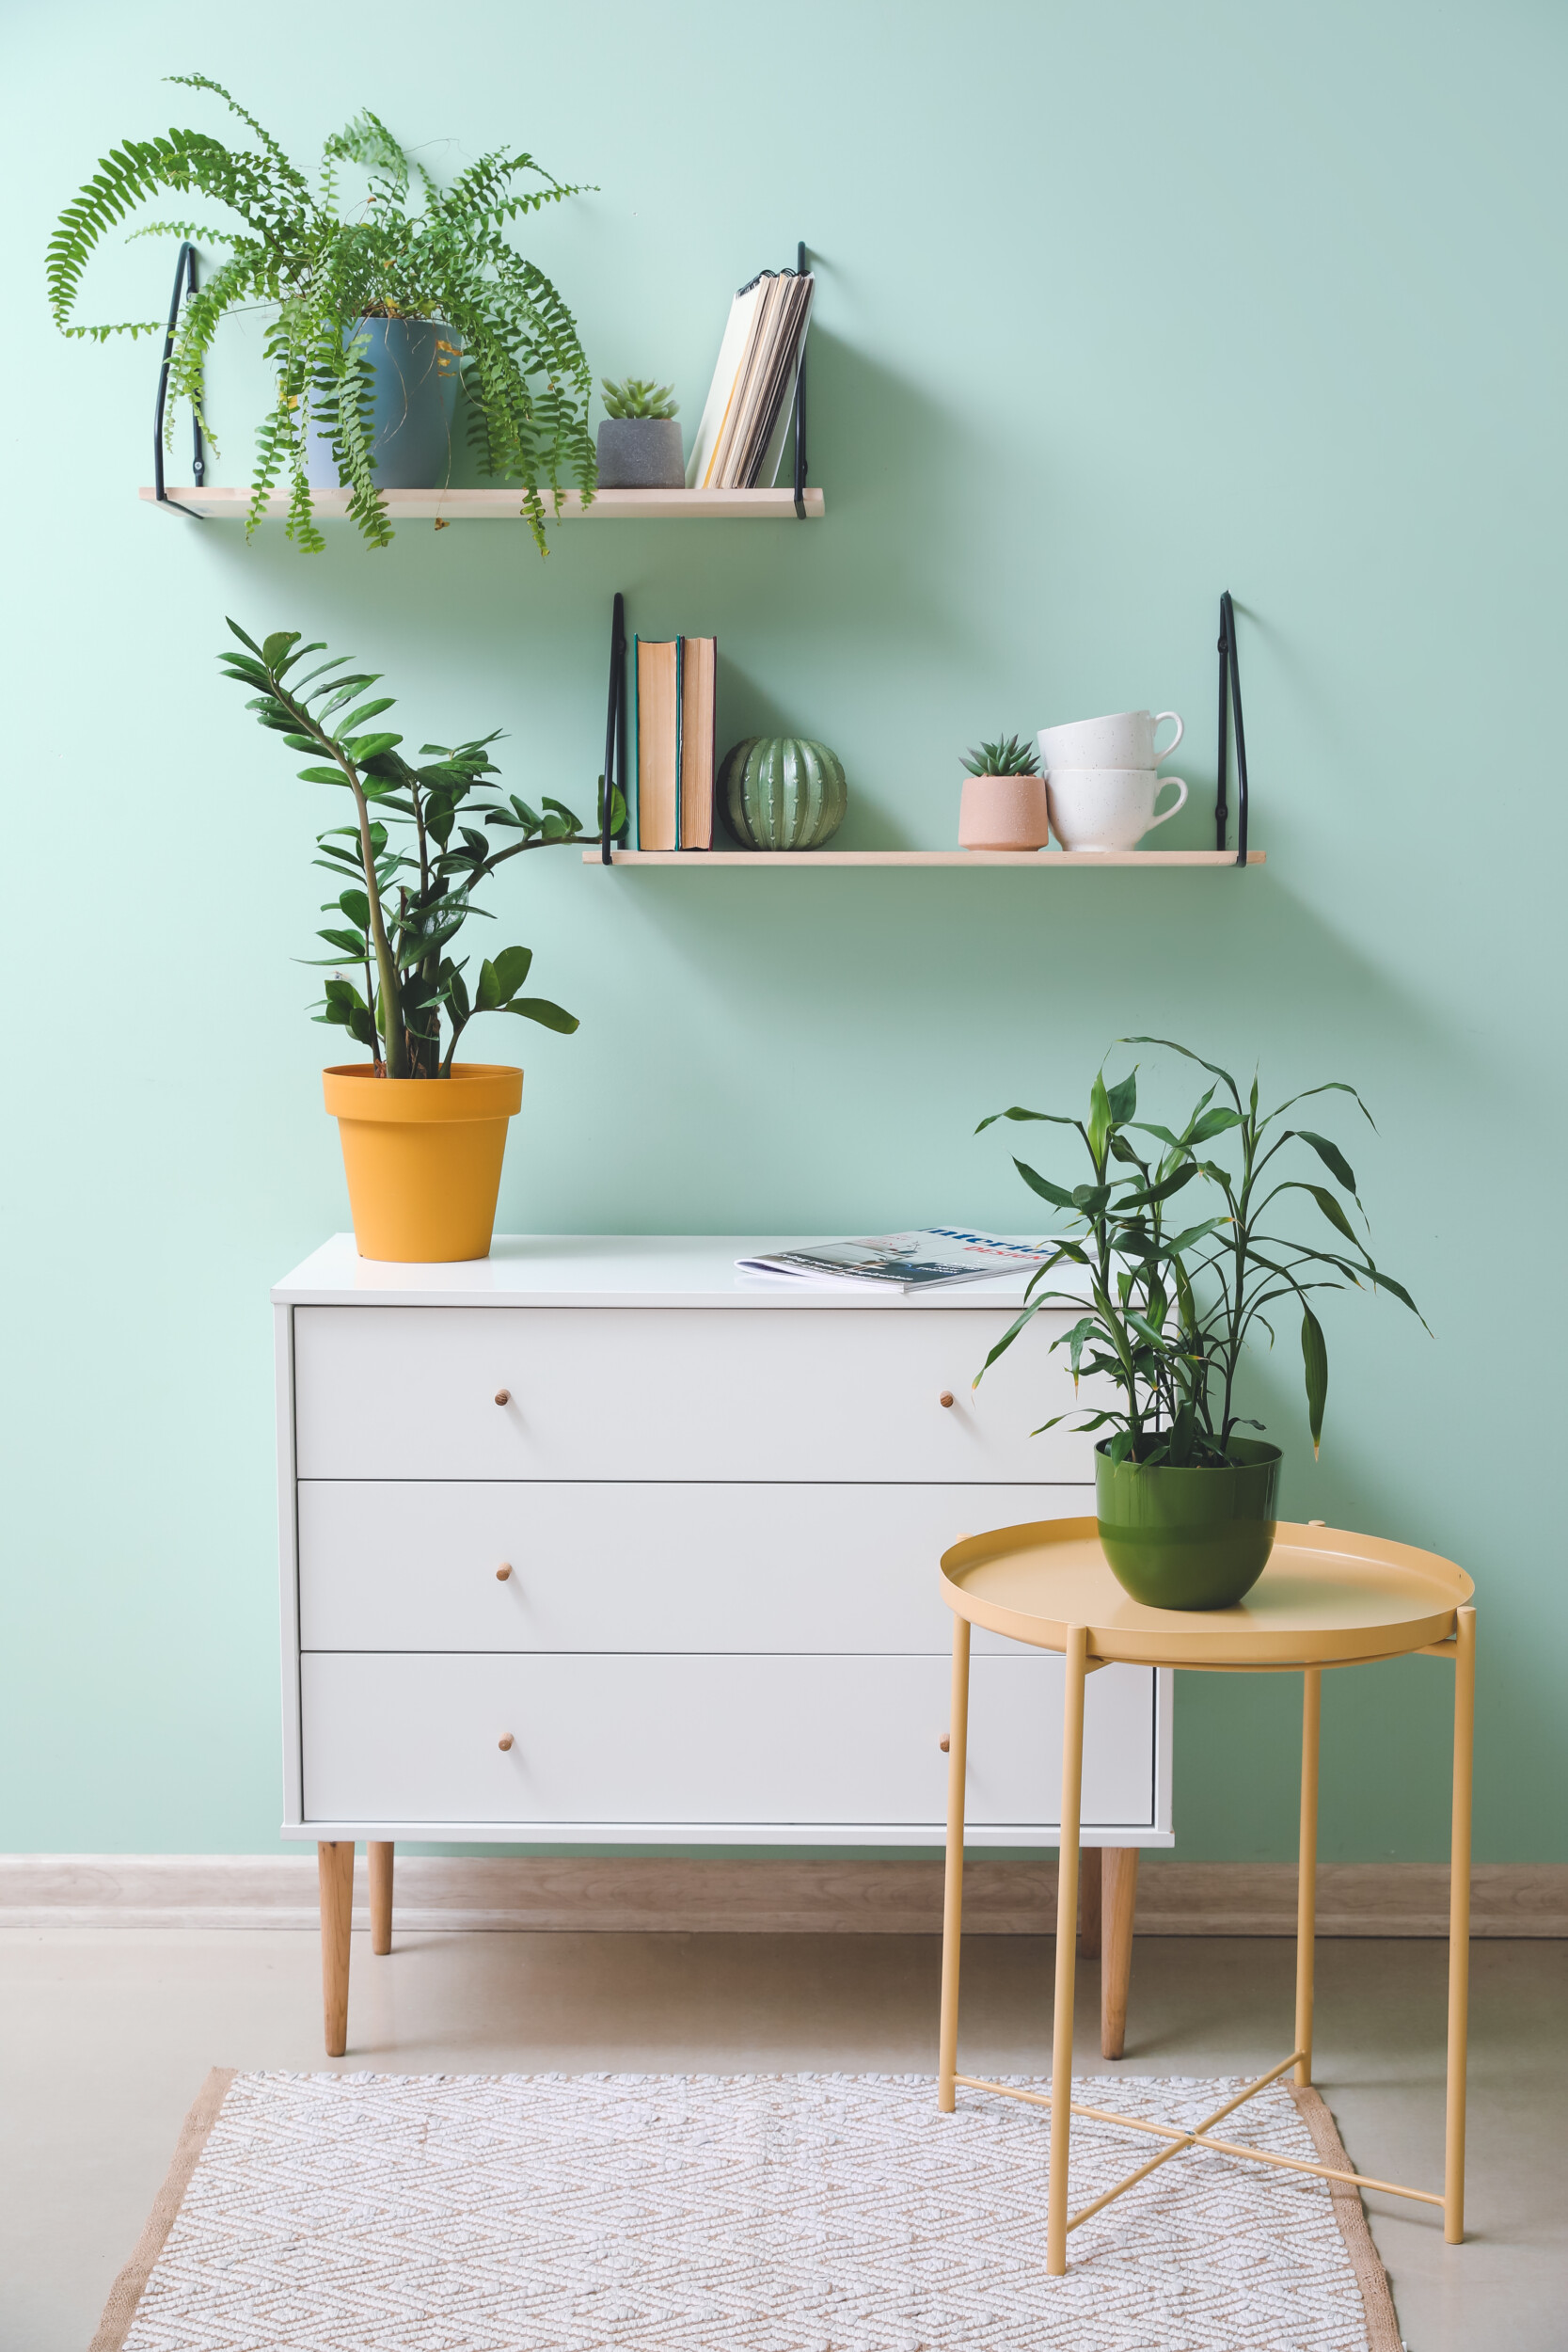 What Goes With Mint Green Walls - Infoupdate.org